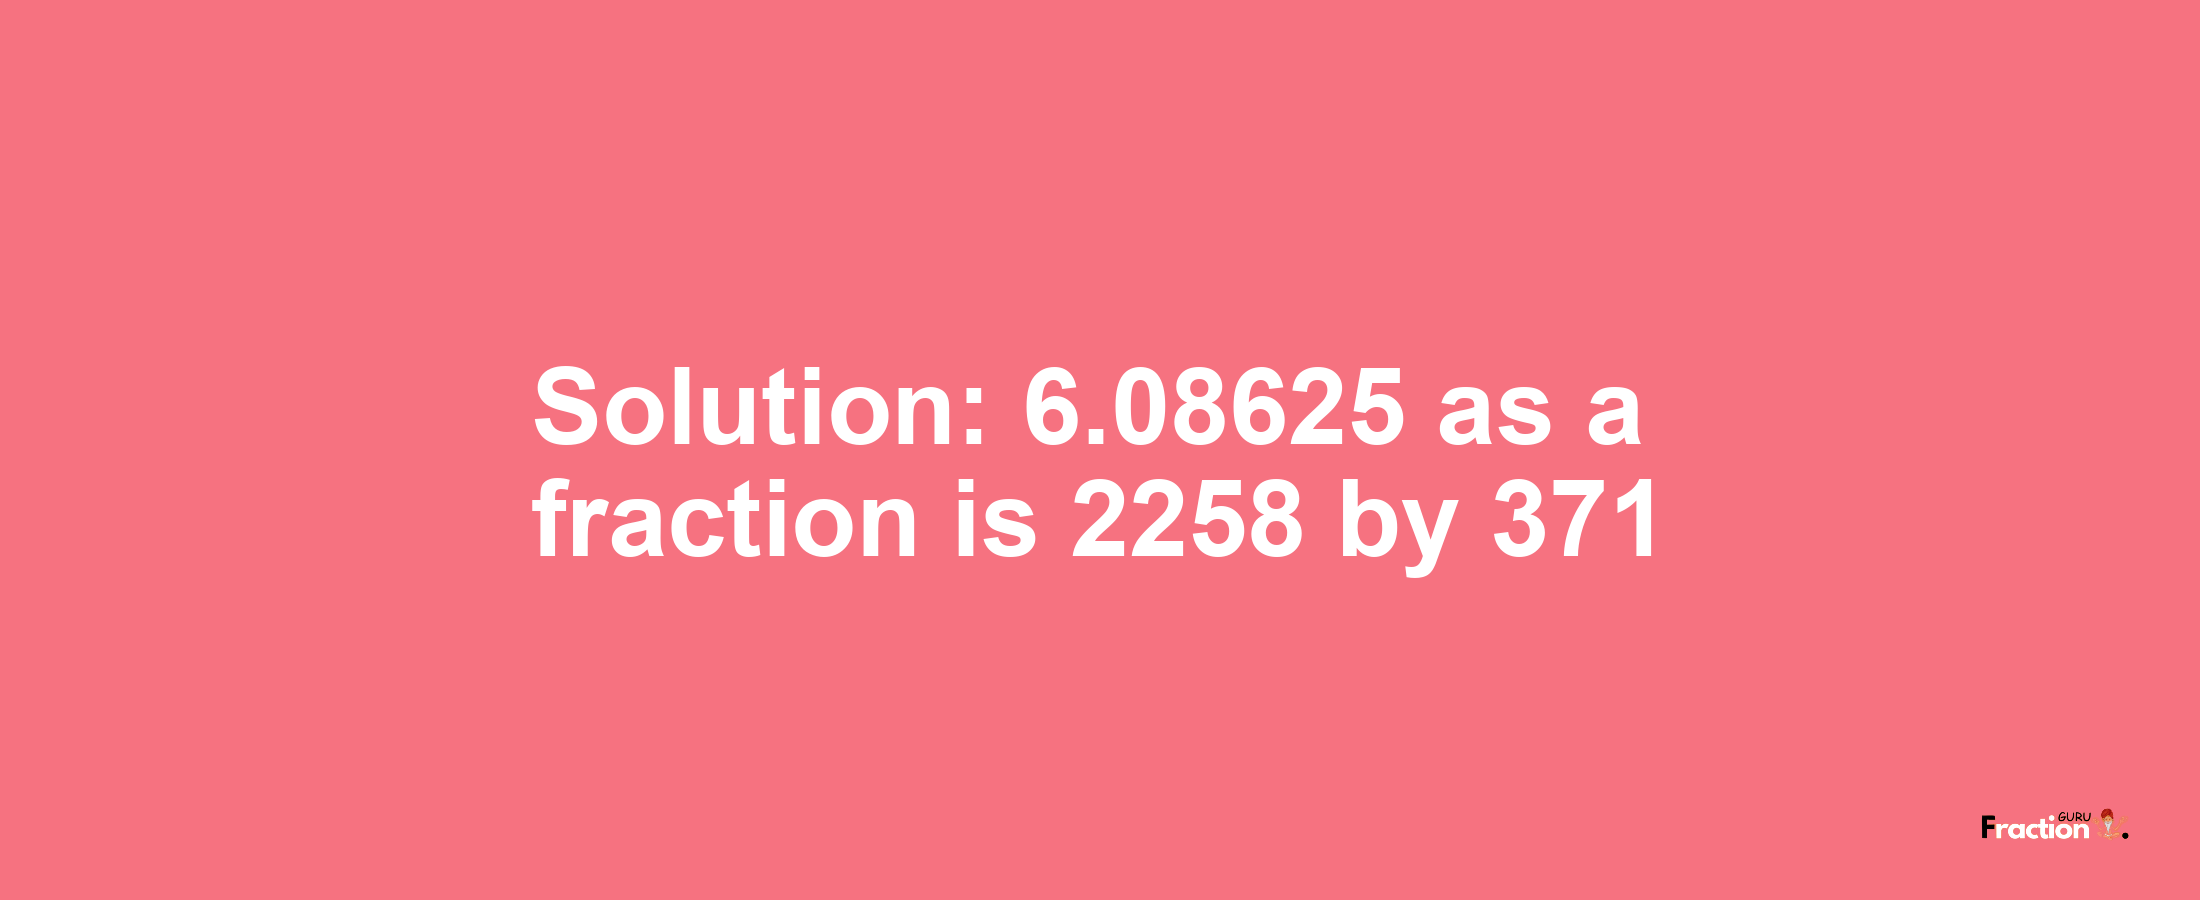 Solution:6.08625 as a fraction is 2258/371